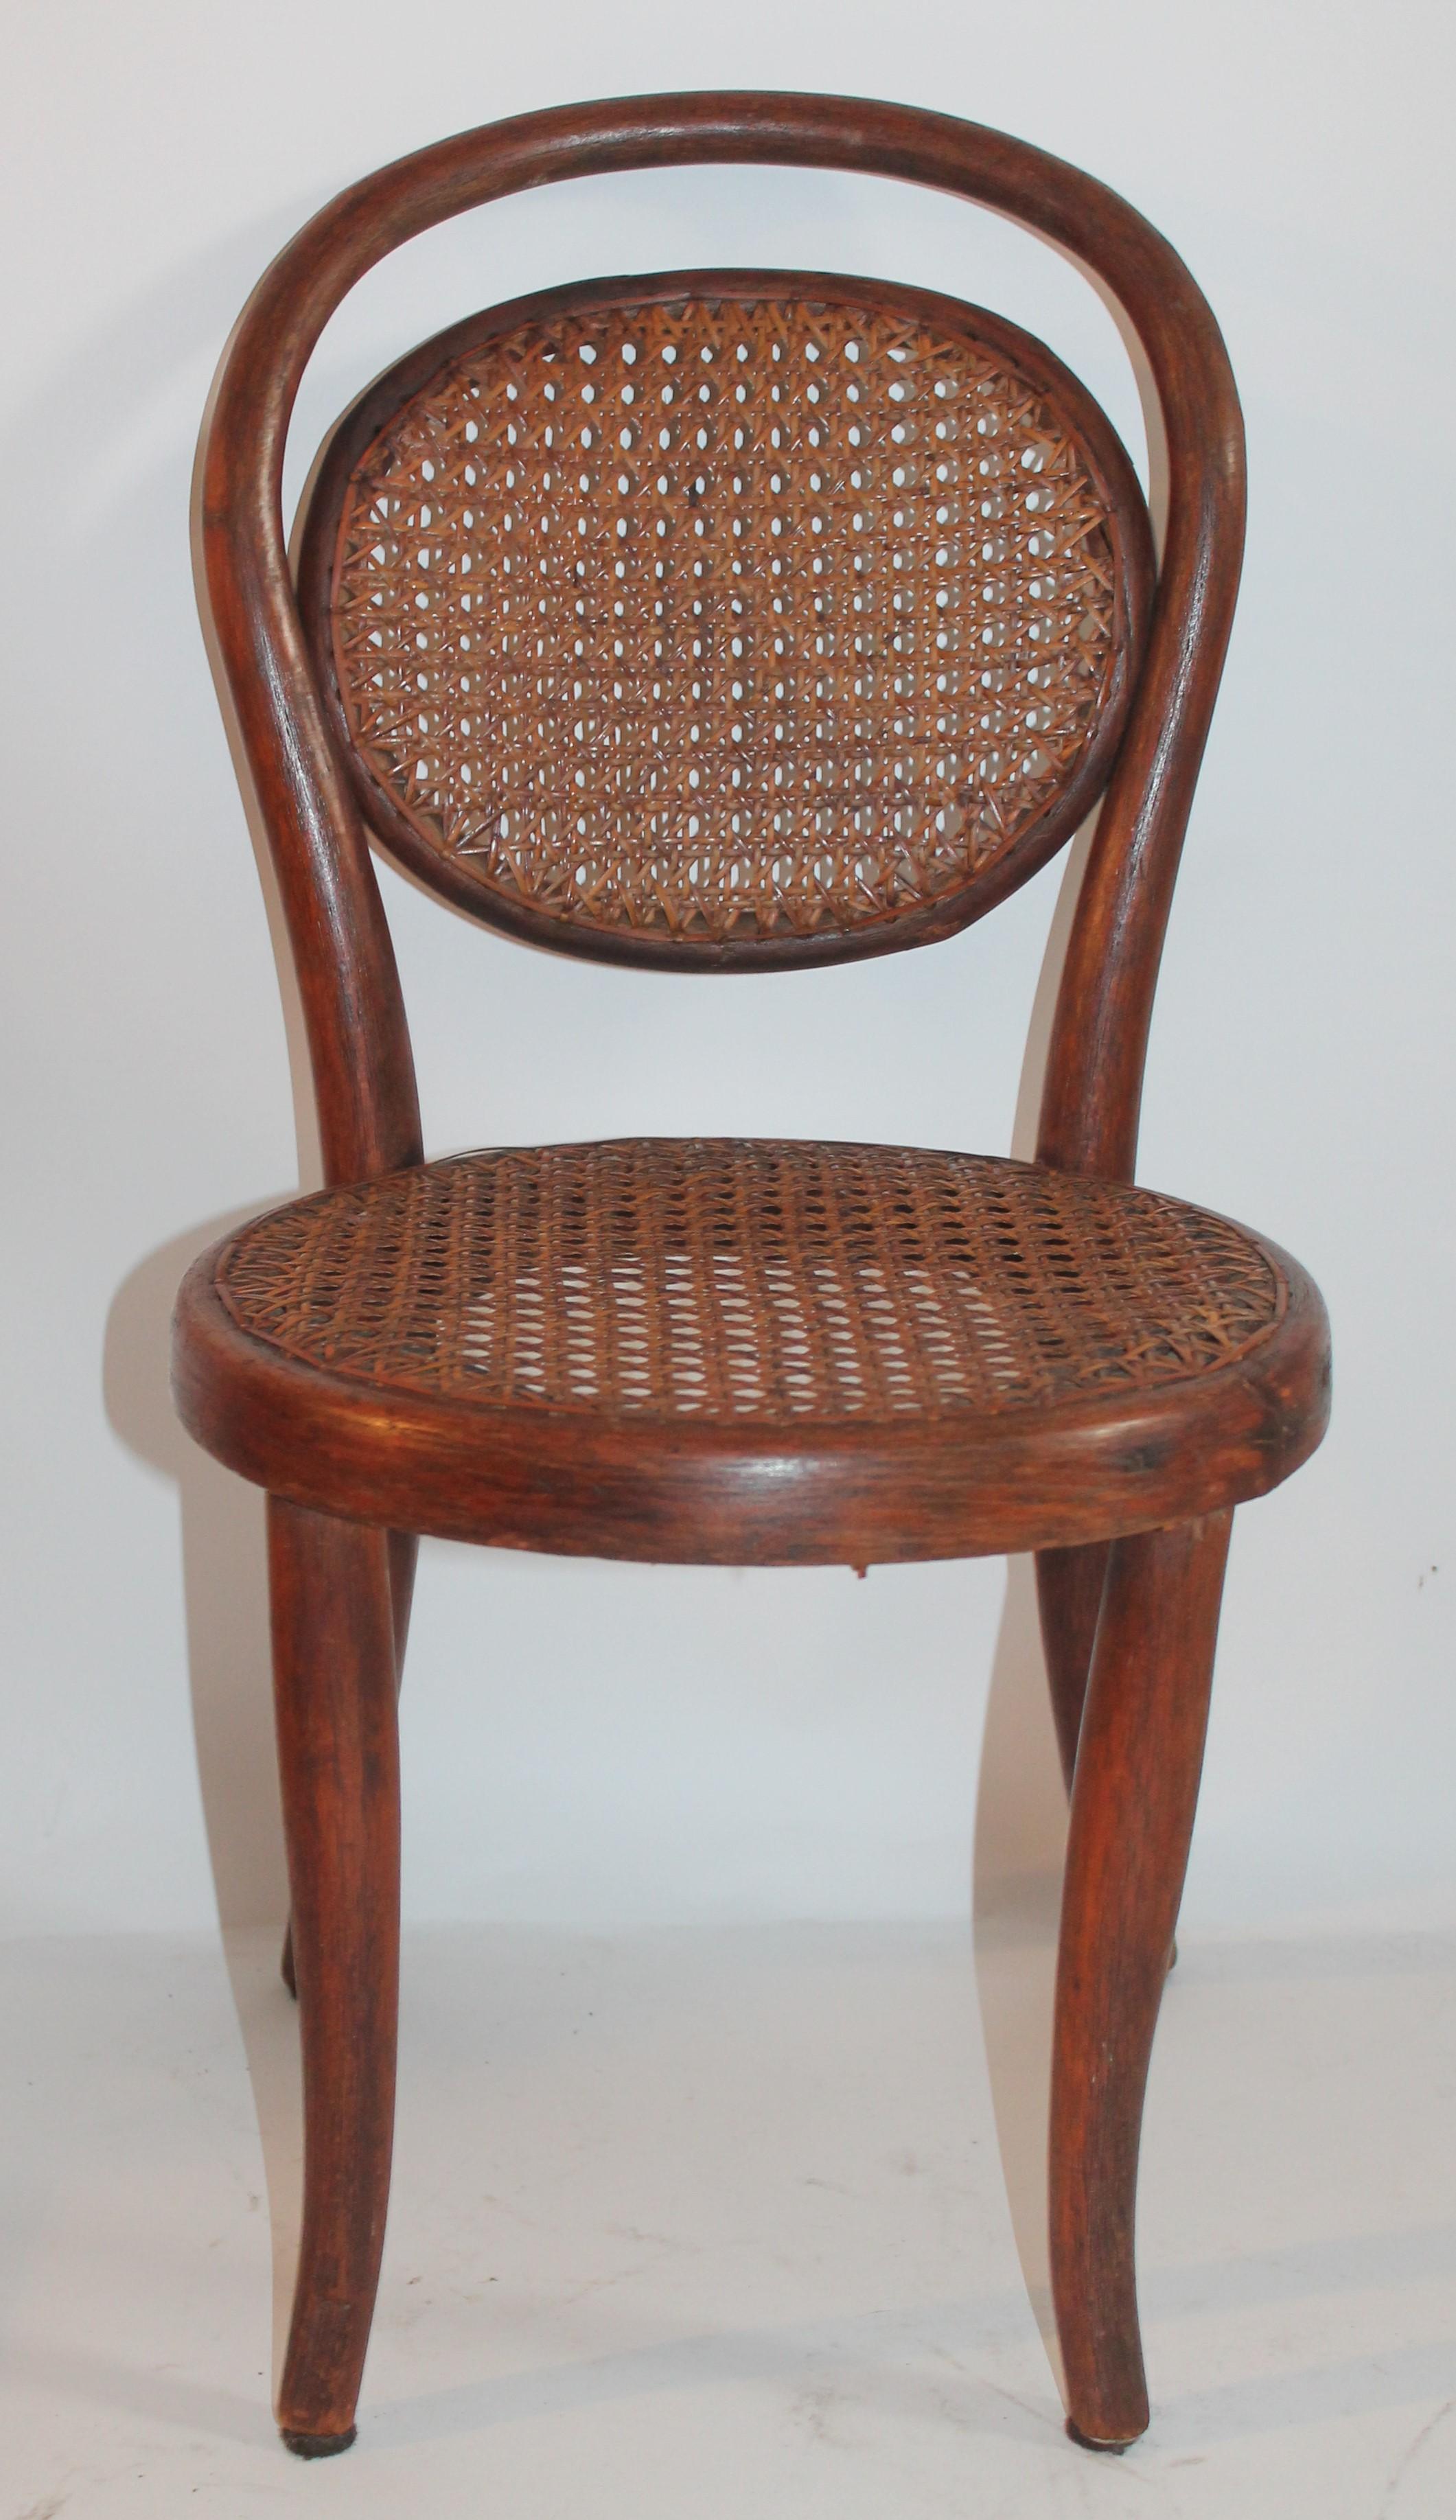 Bentwood Rocker and Chair with Cane Seats, 19th Century For Sale 2